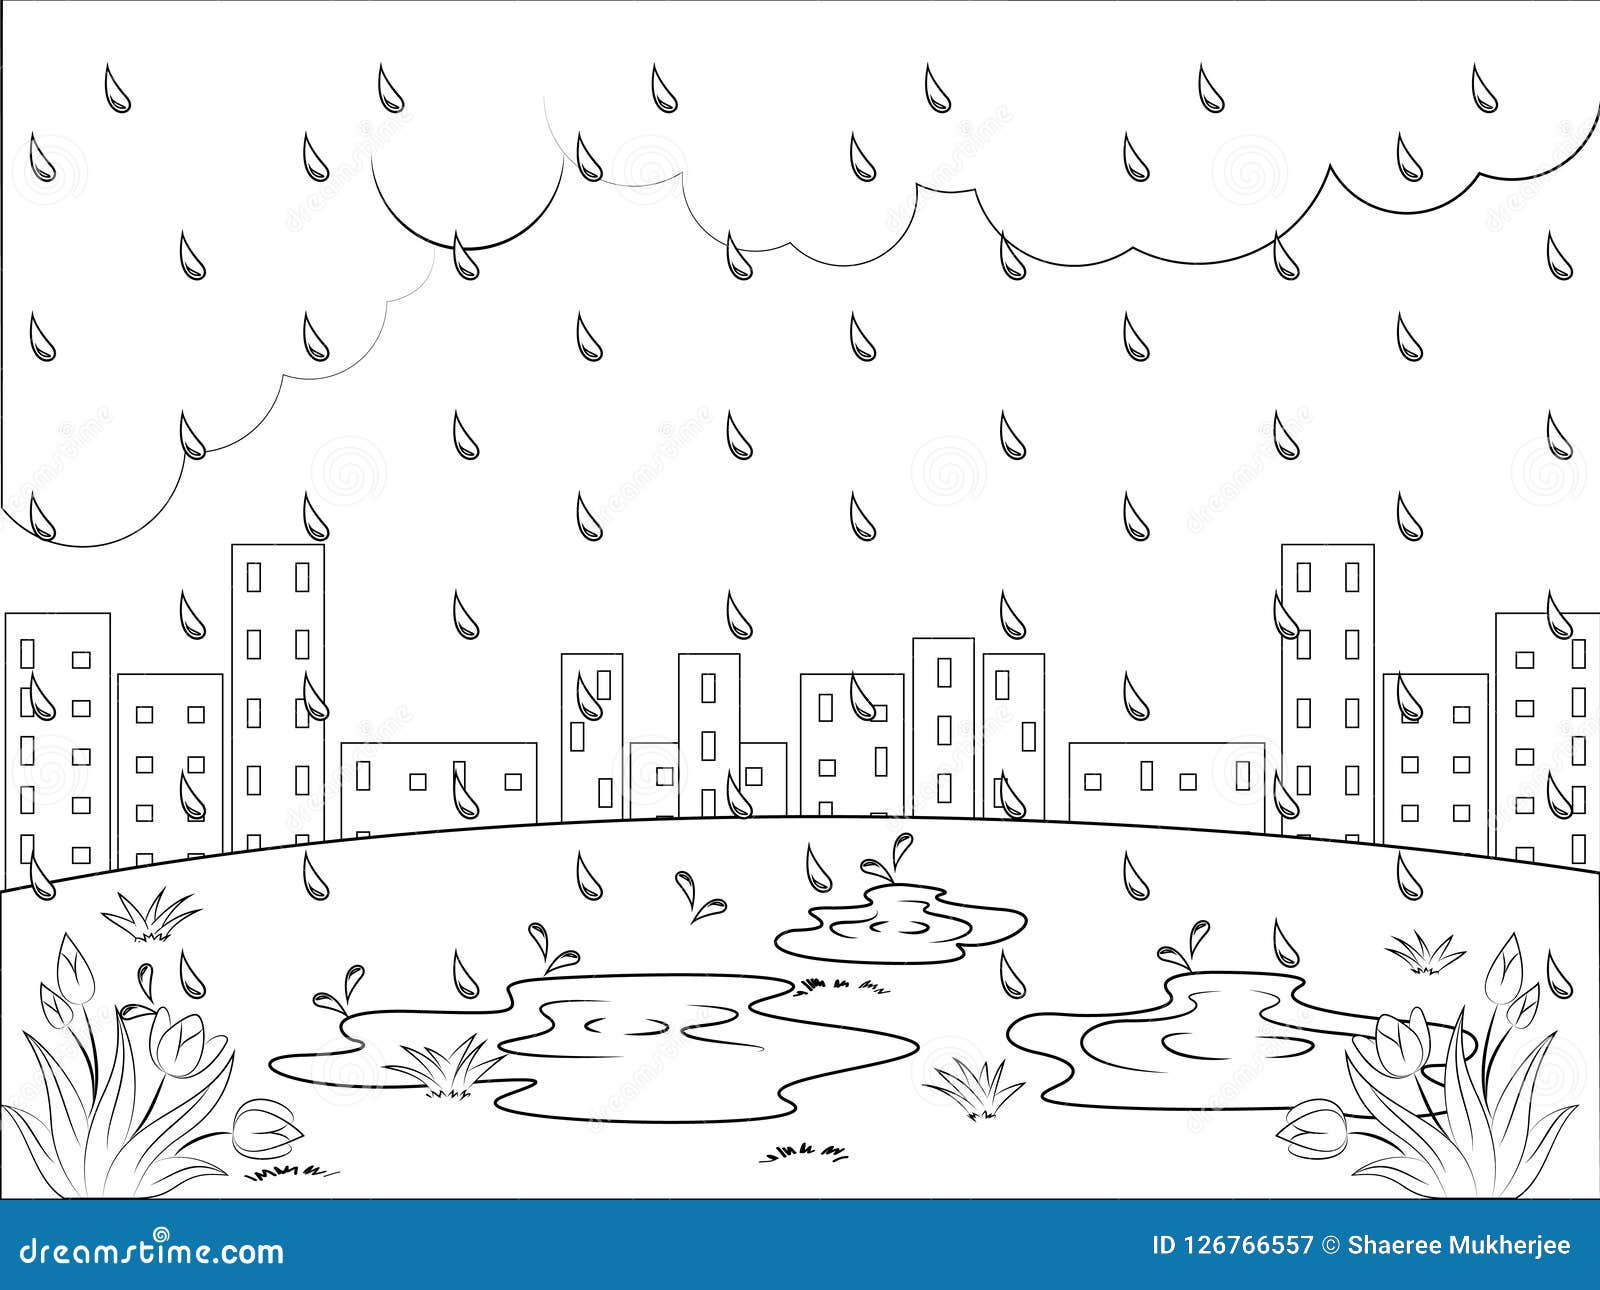 Rainy day coloring page for kids stock vector